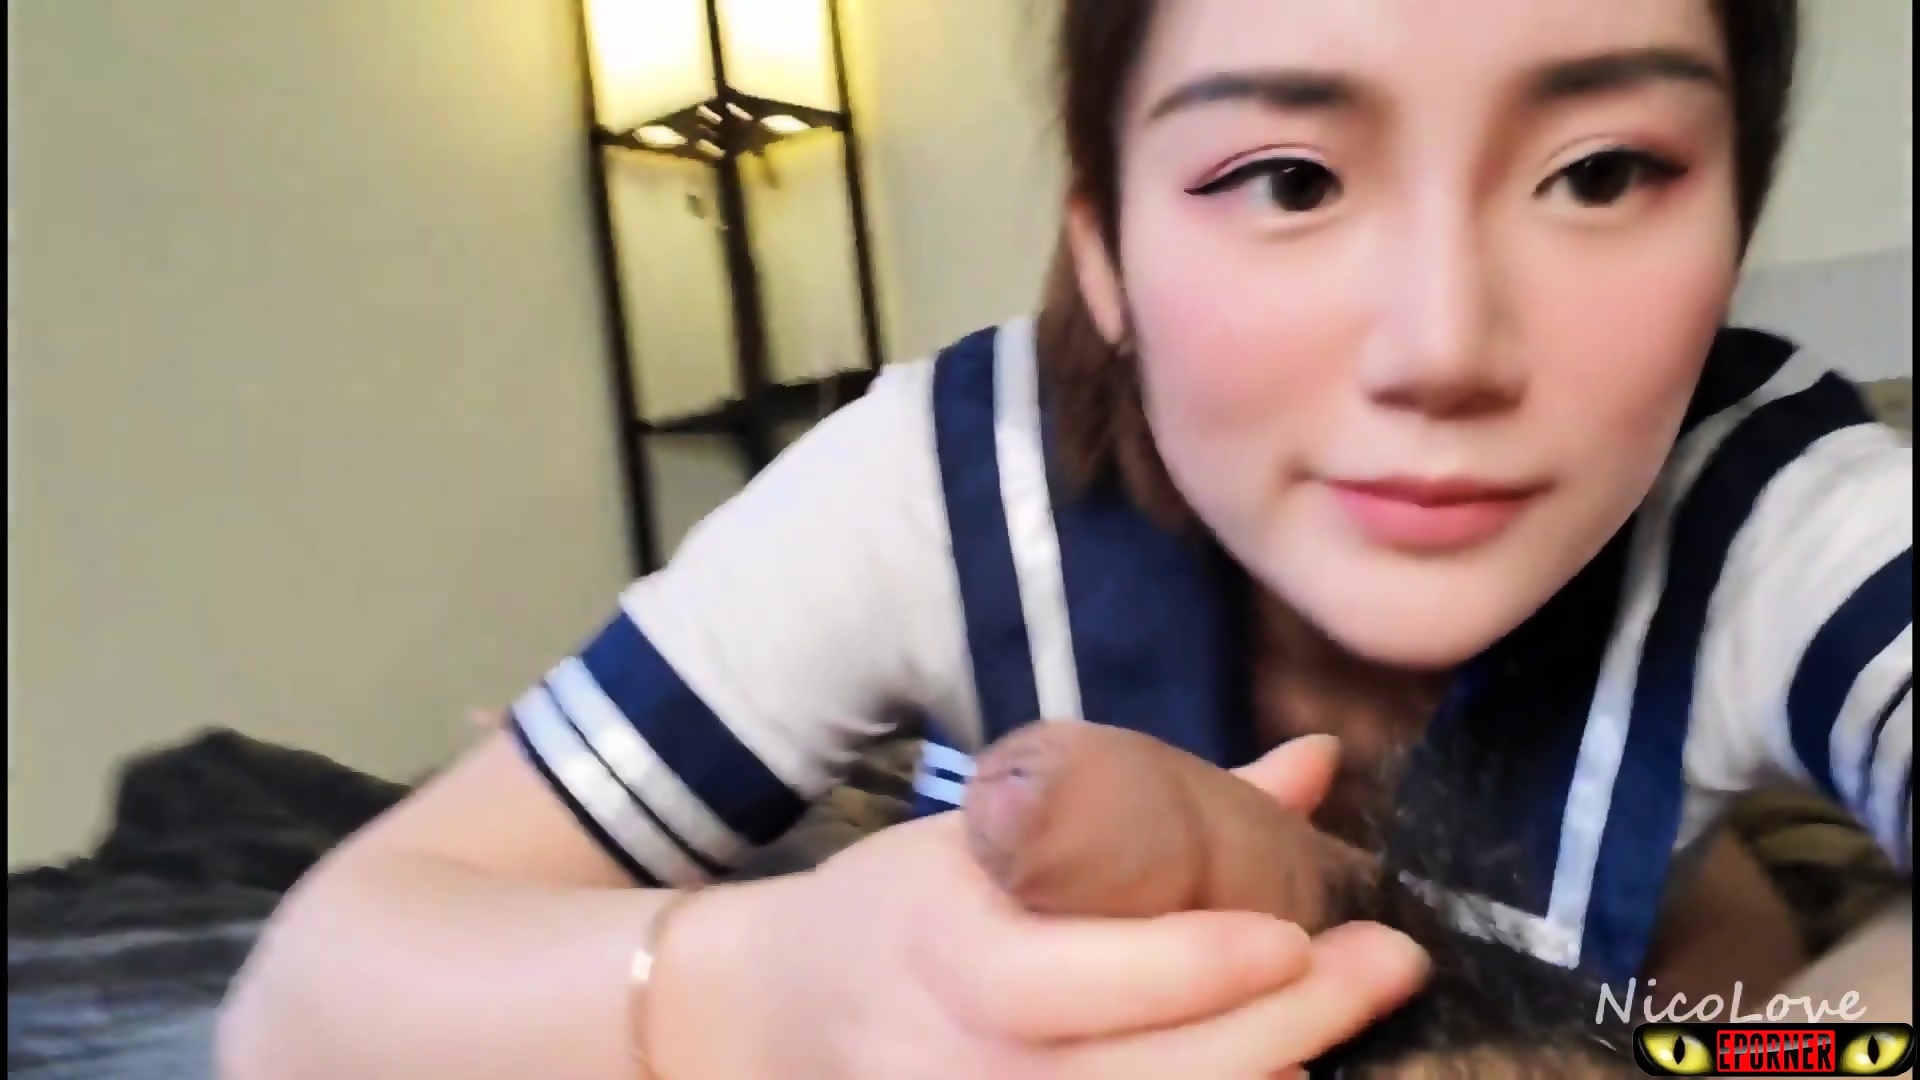 Schoolgirl ASIAN BLOWJOB Uncensored Chinese Finish Cum Mouth 60 Fps - Teen Sweet